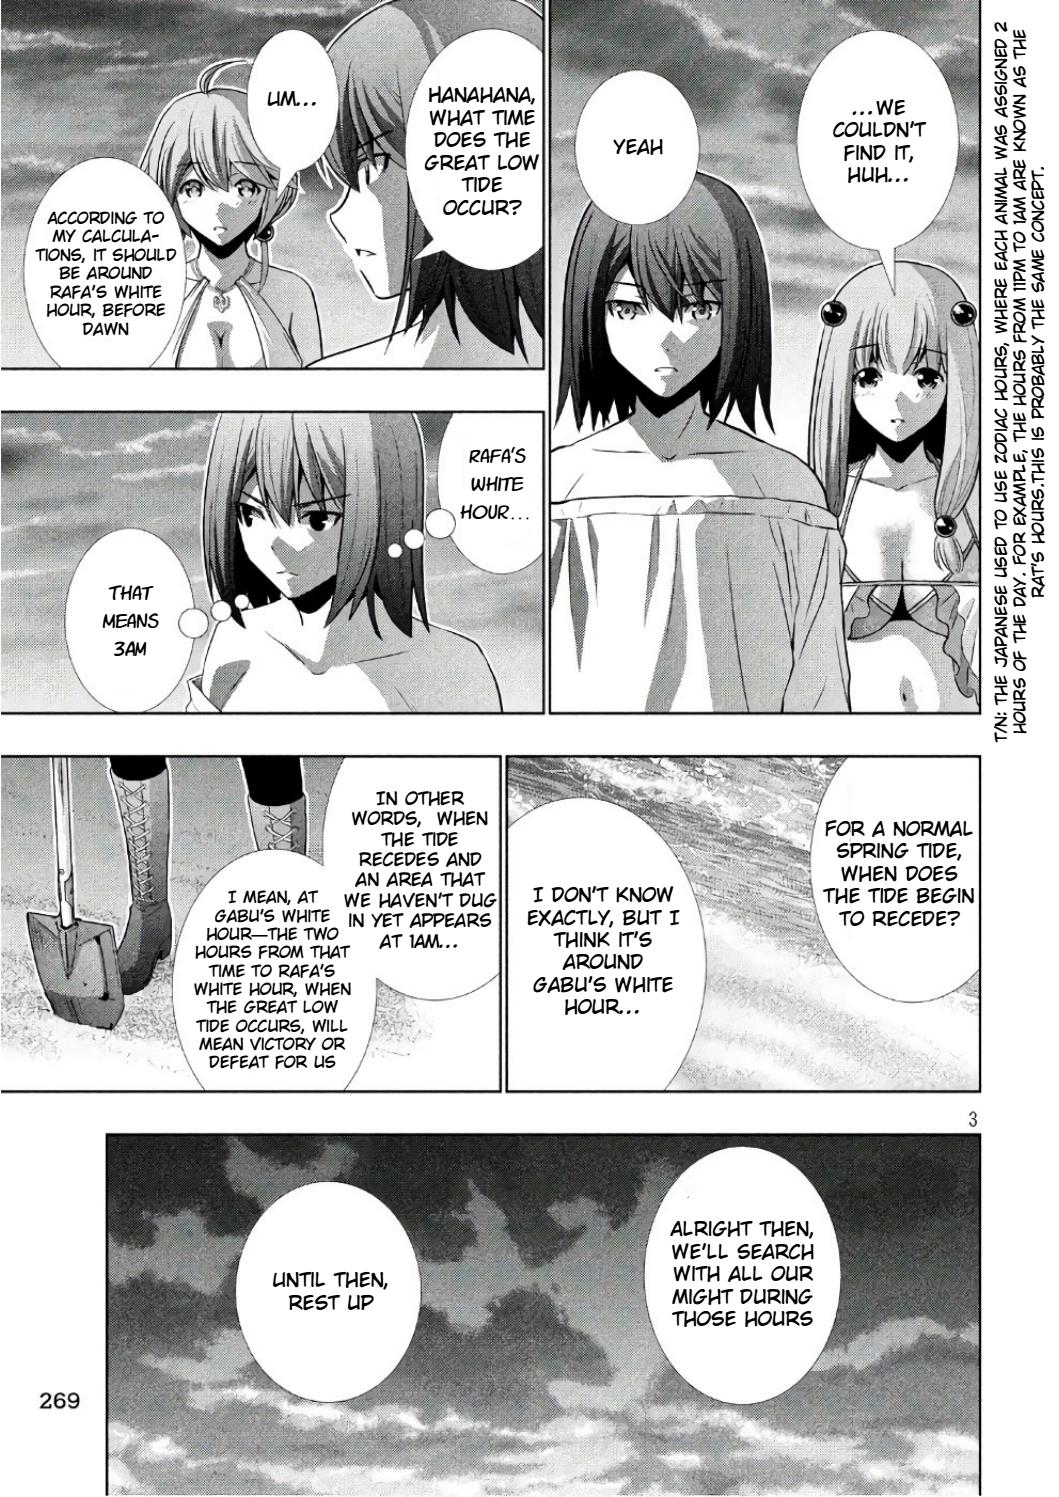 Parallel Paradise Vol.5 Chapter 43: Long Long Night - Picture 3